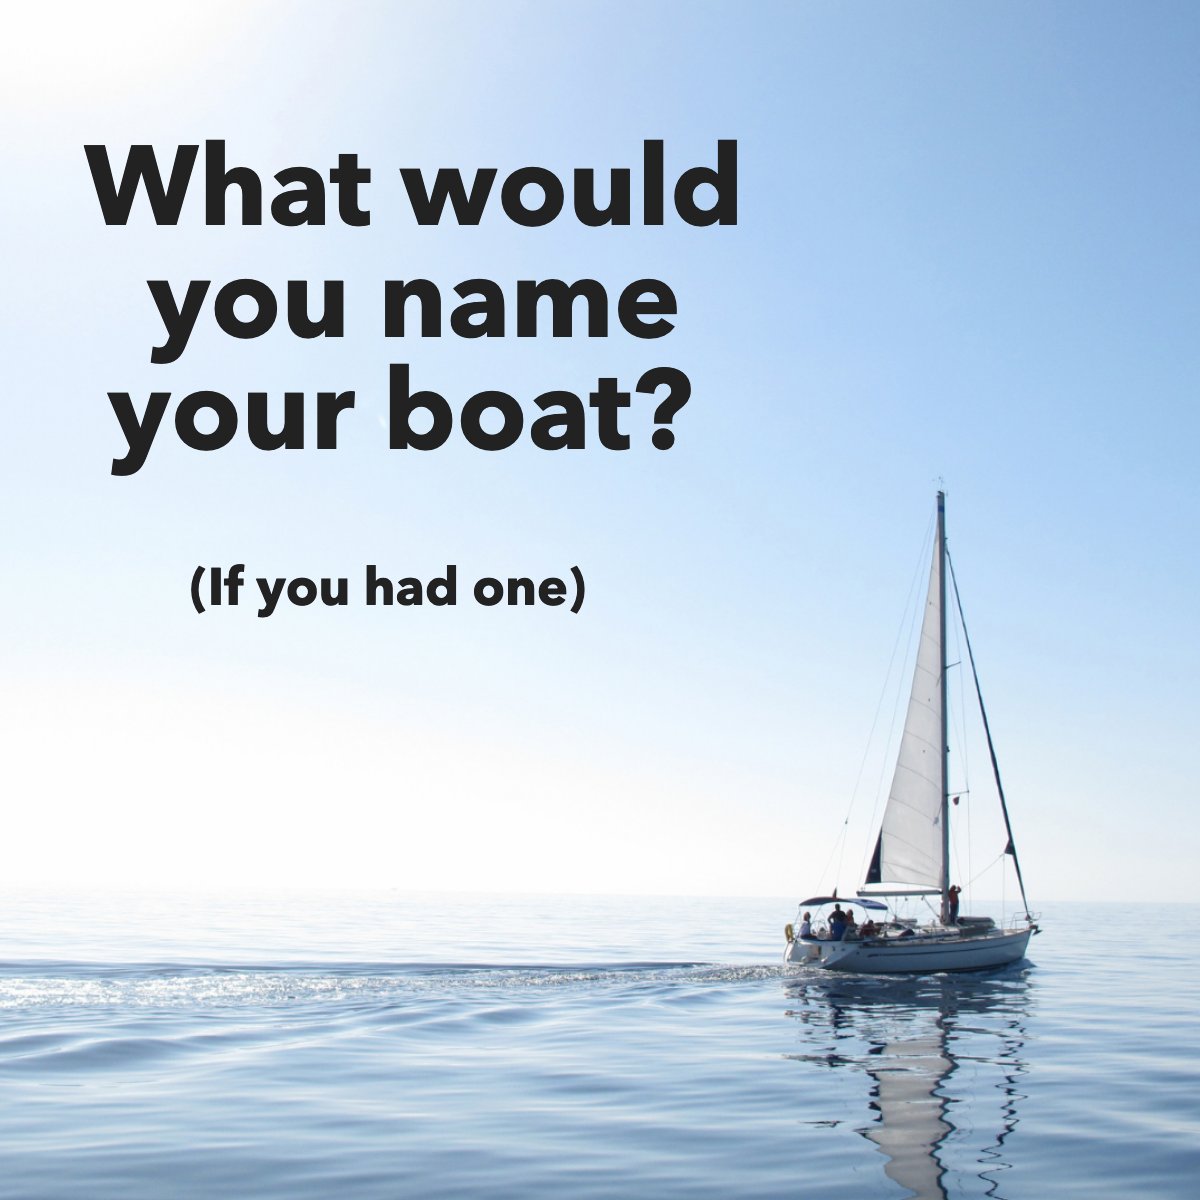 Naming boats after famous songs, movies, or other cultural arts you love is acceptable and entertaining. 😆😉

#boatrip    #boatinglife    #boats    #ocean    #searayboats    #boatfishing